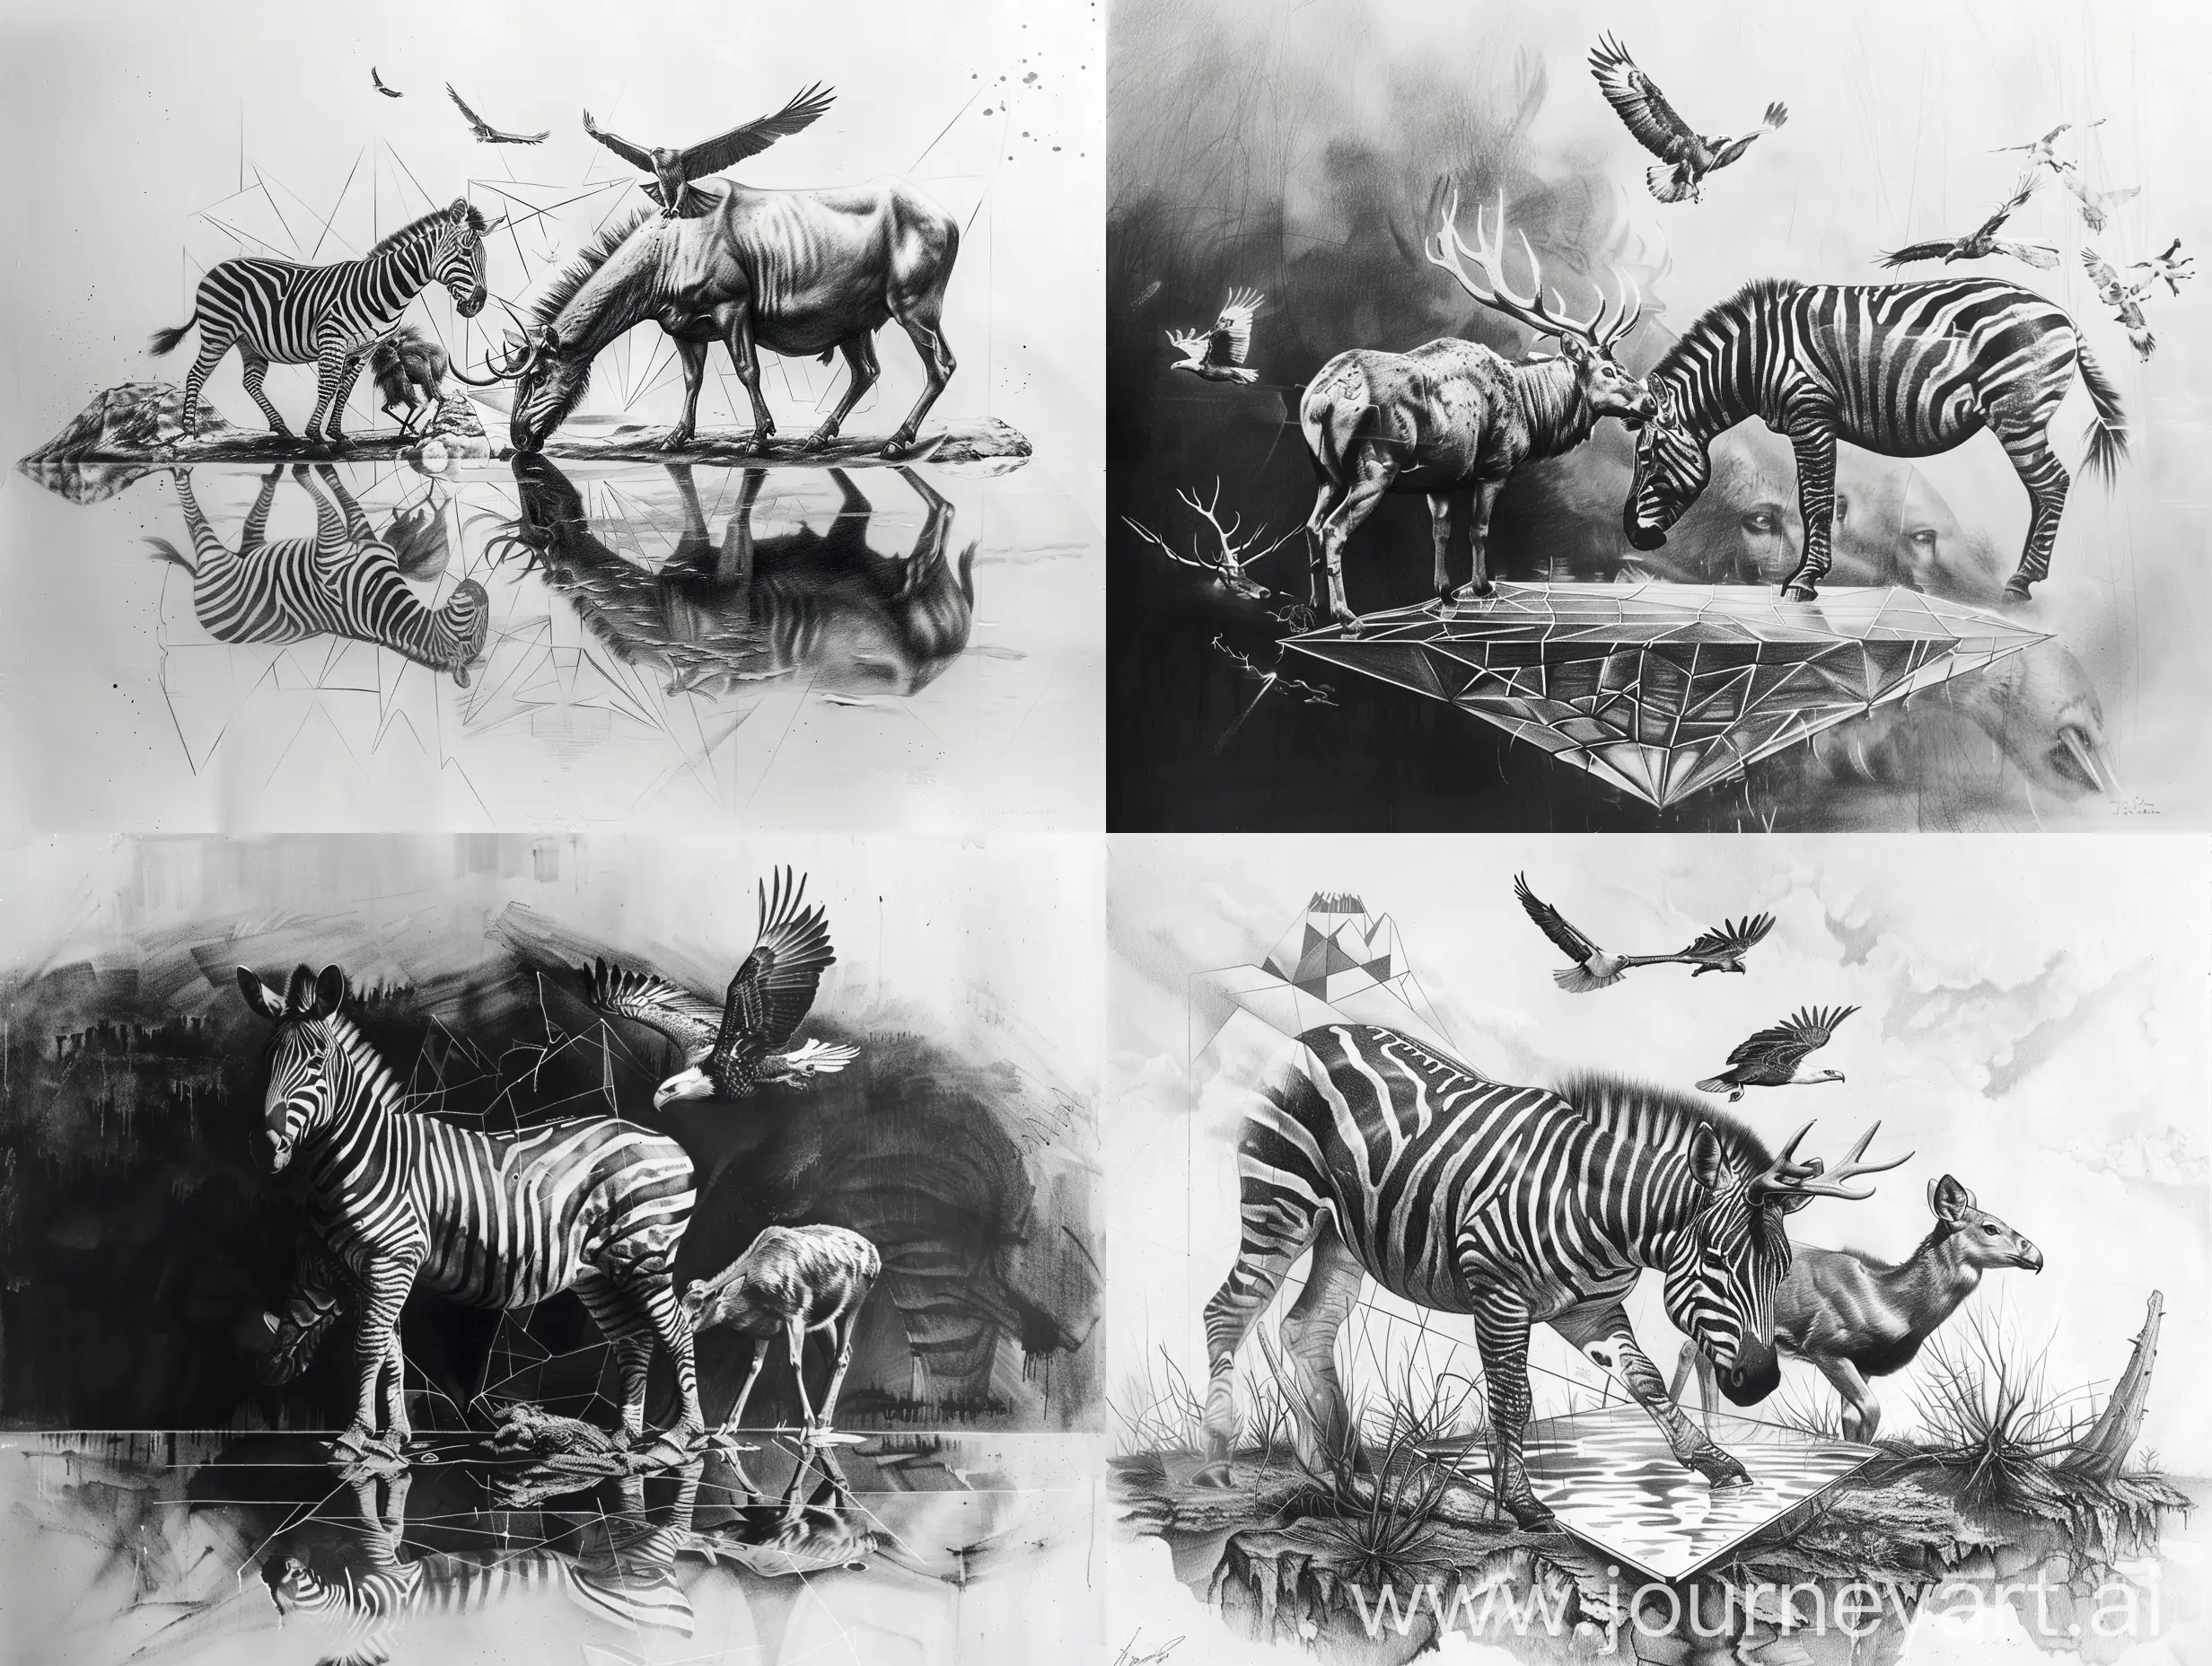 Hyper-Realistic-Pencil-Sketch-of-Zebra-and-Deer-with-Eagles-in-Flight